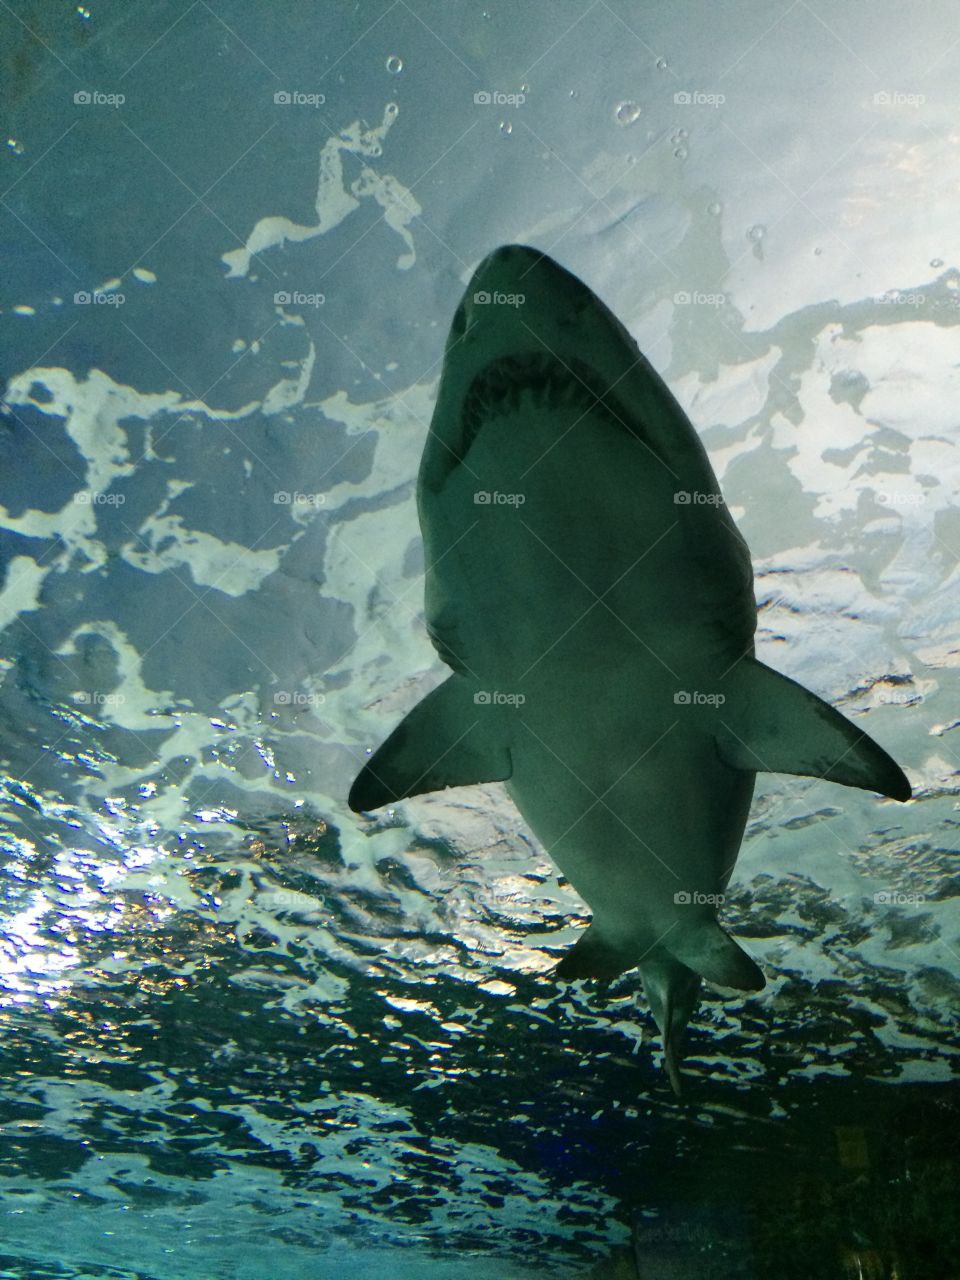 The view from below a beautiful shark. Amazing to see their white bellies that keep them hidden from their pray below. 